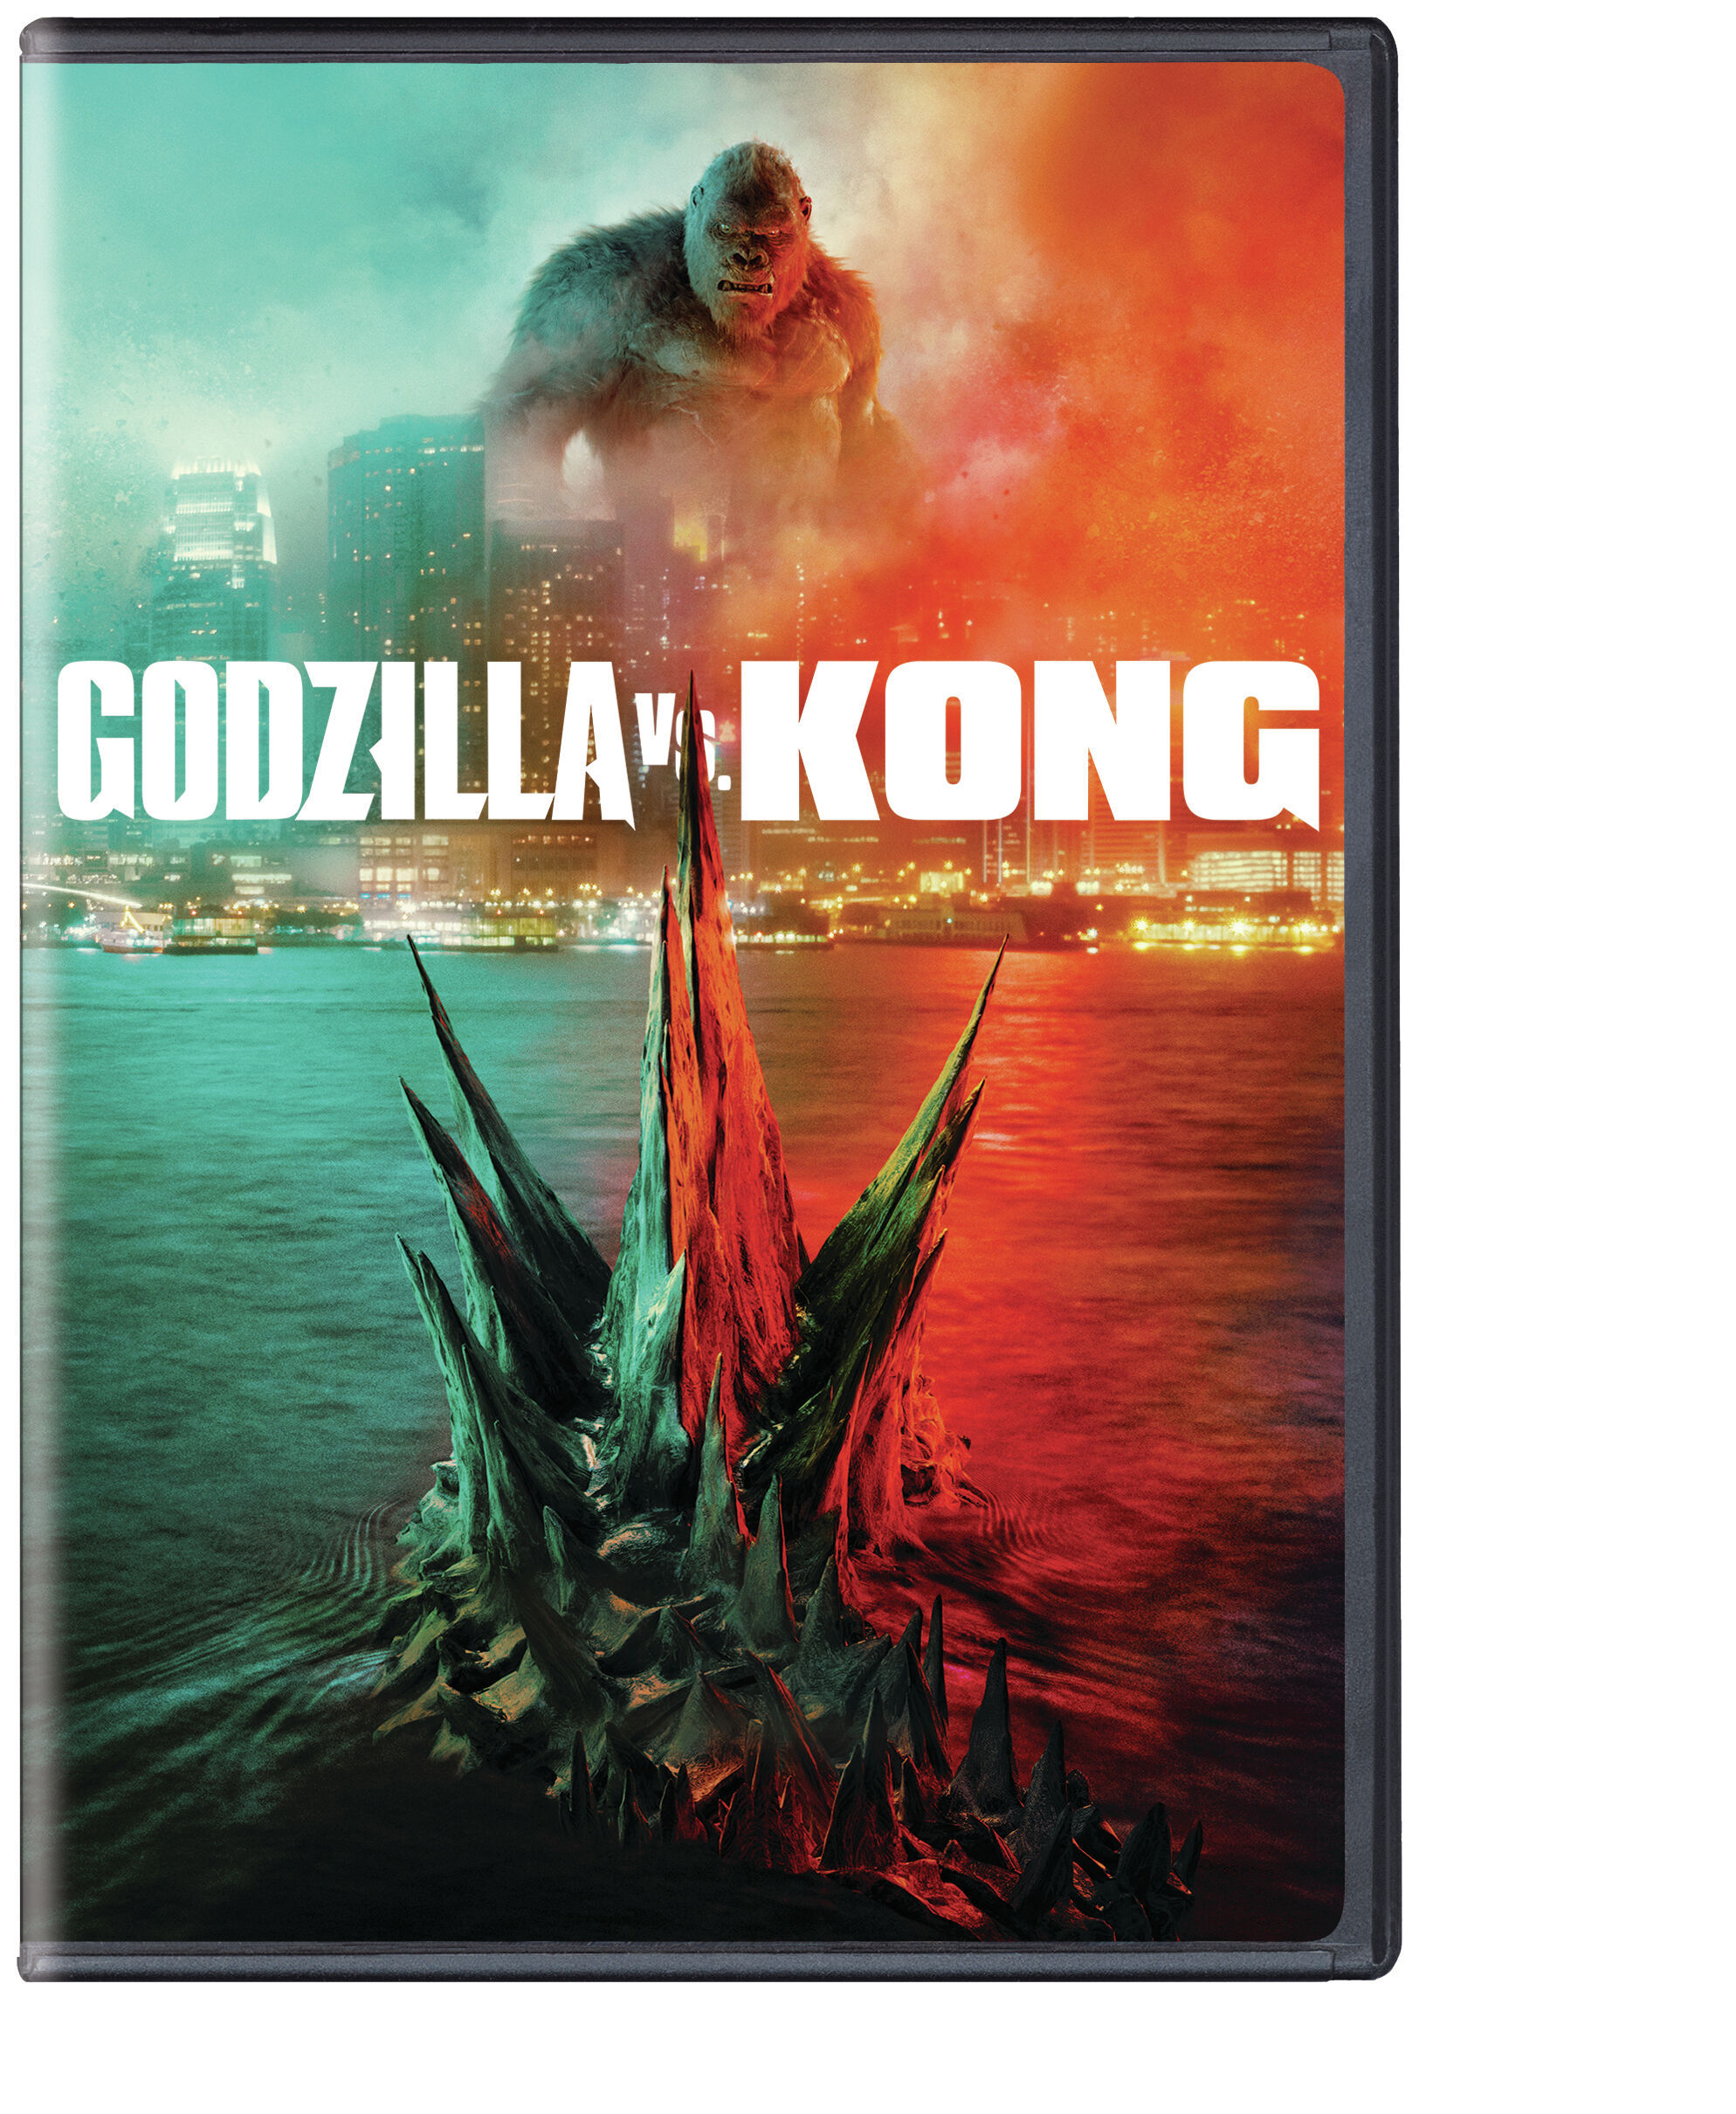 Godzilla Vs Kong (Special Edition) - DVD [ 2021 ]  - Action Movies On DVD - Movies On GRUV